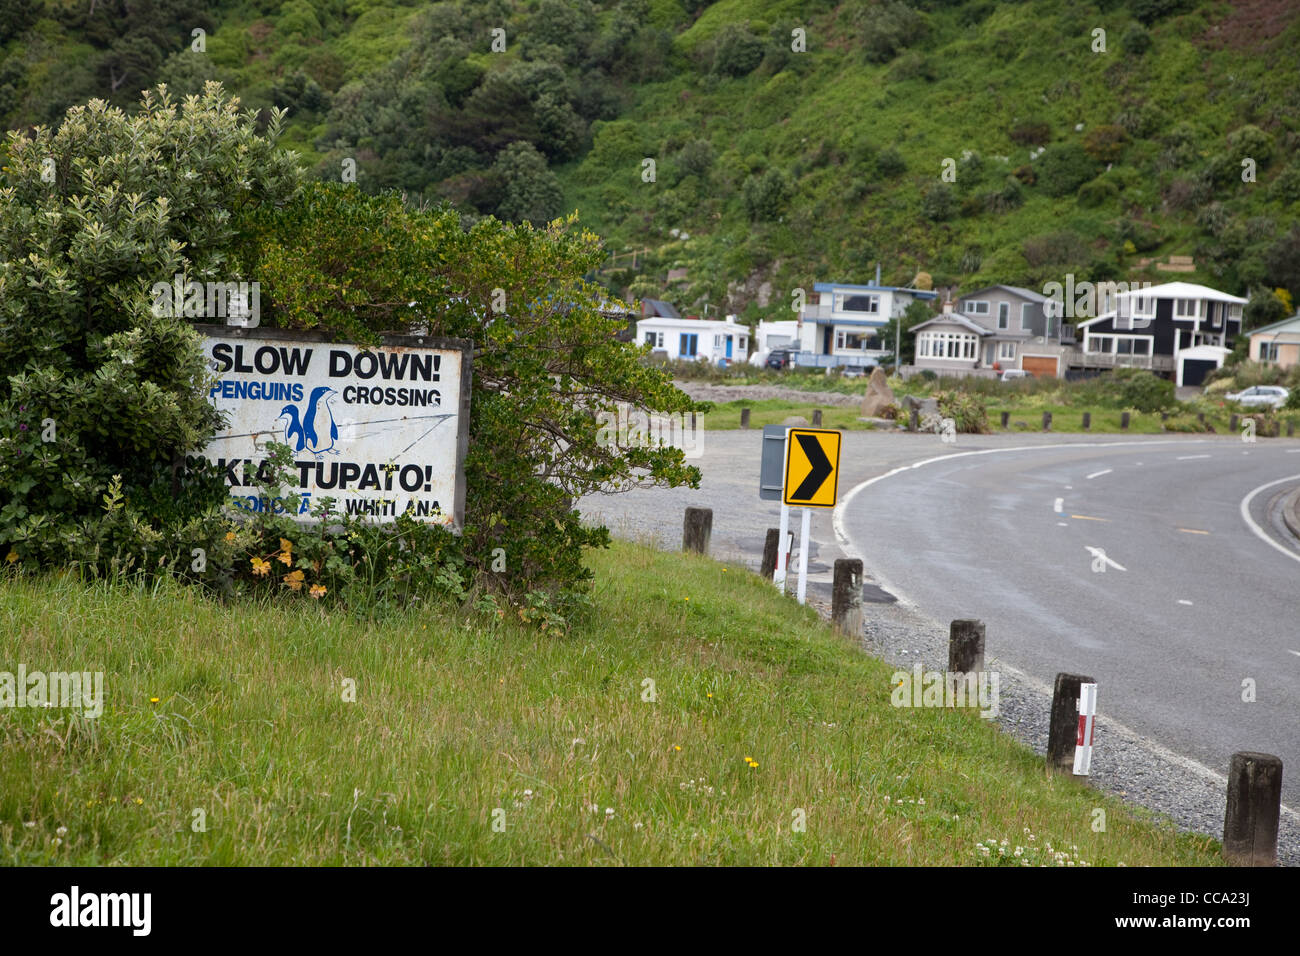 Wellington, New Zealand. "Slow down for Penguins" Sign, Suburban Residential Area. Stock Photo